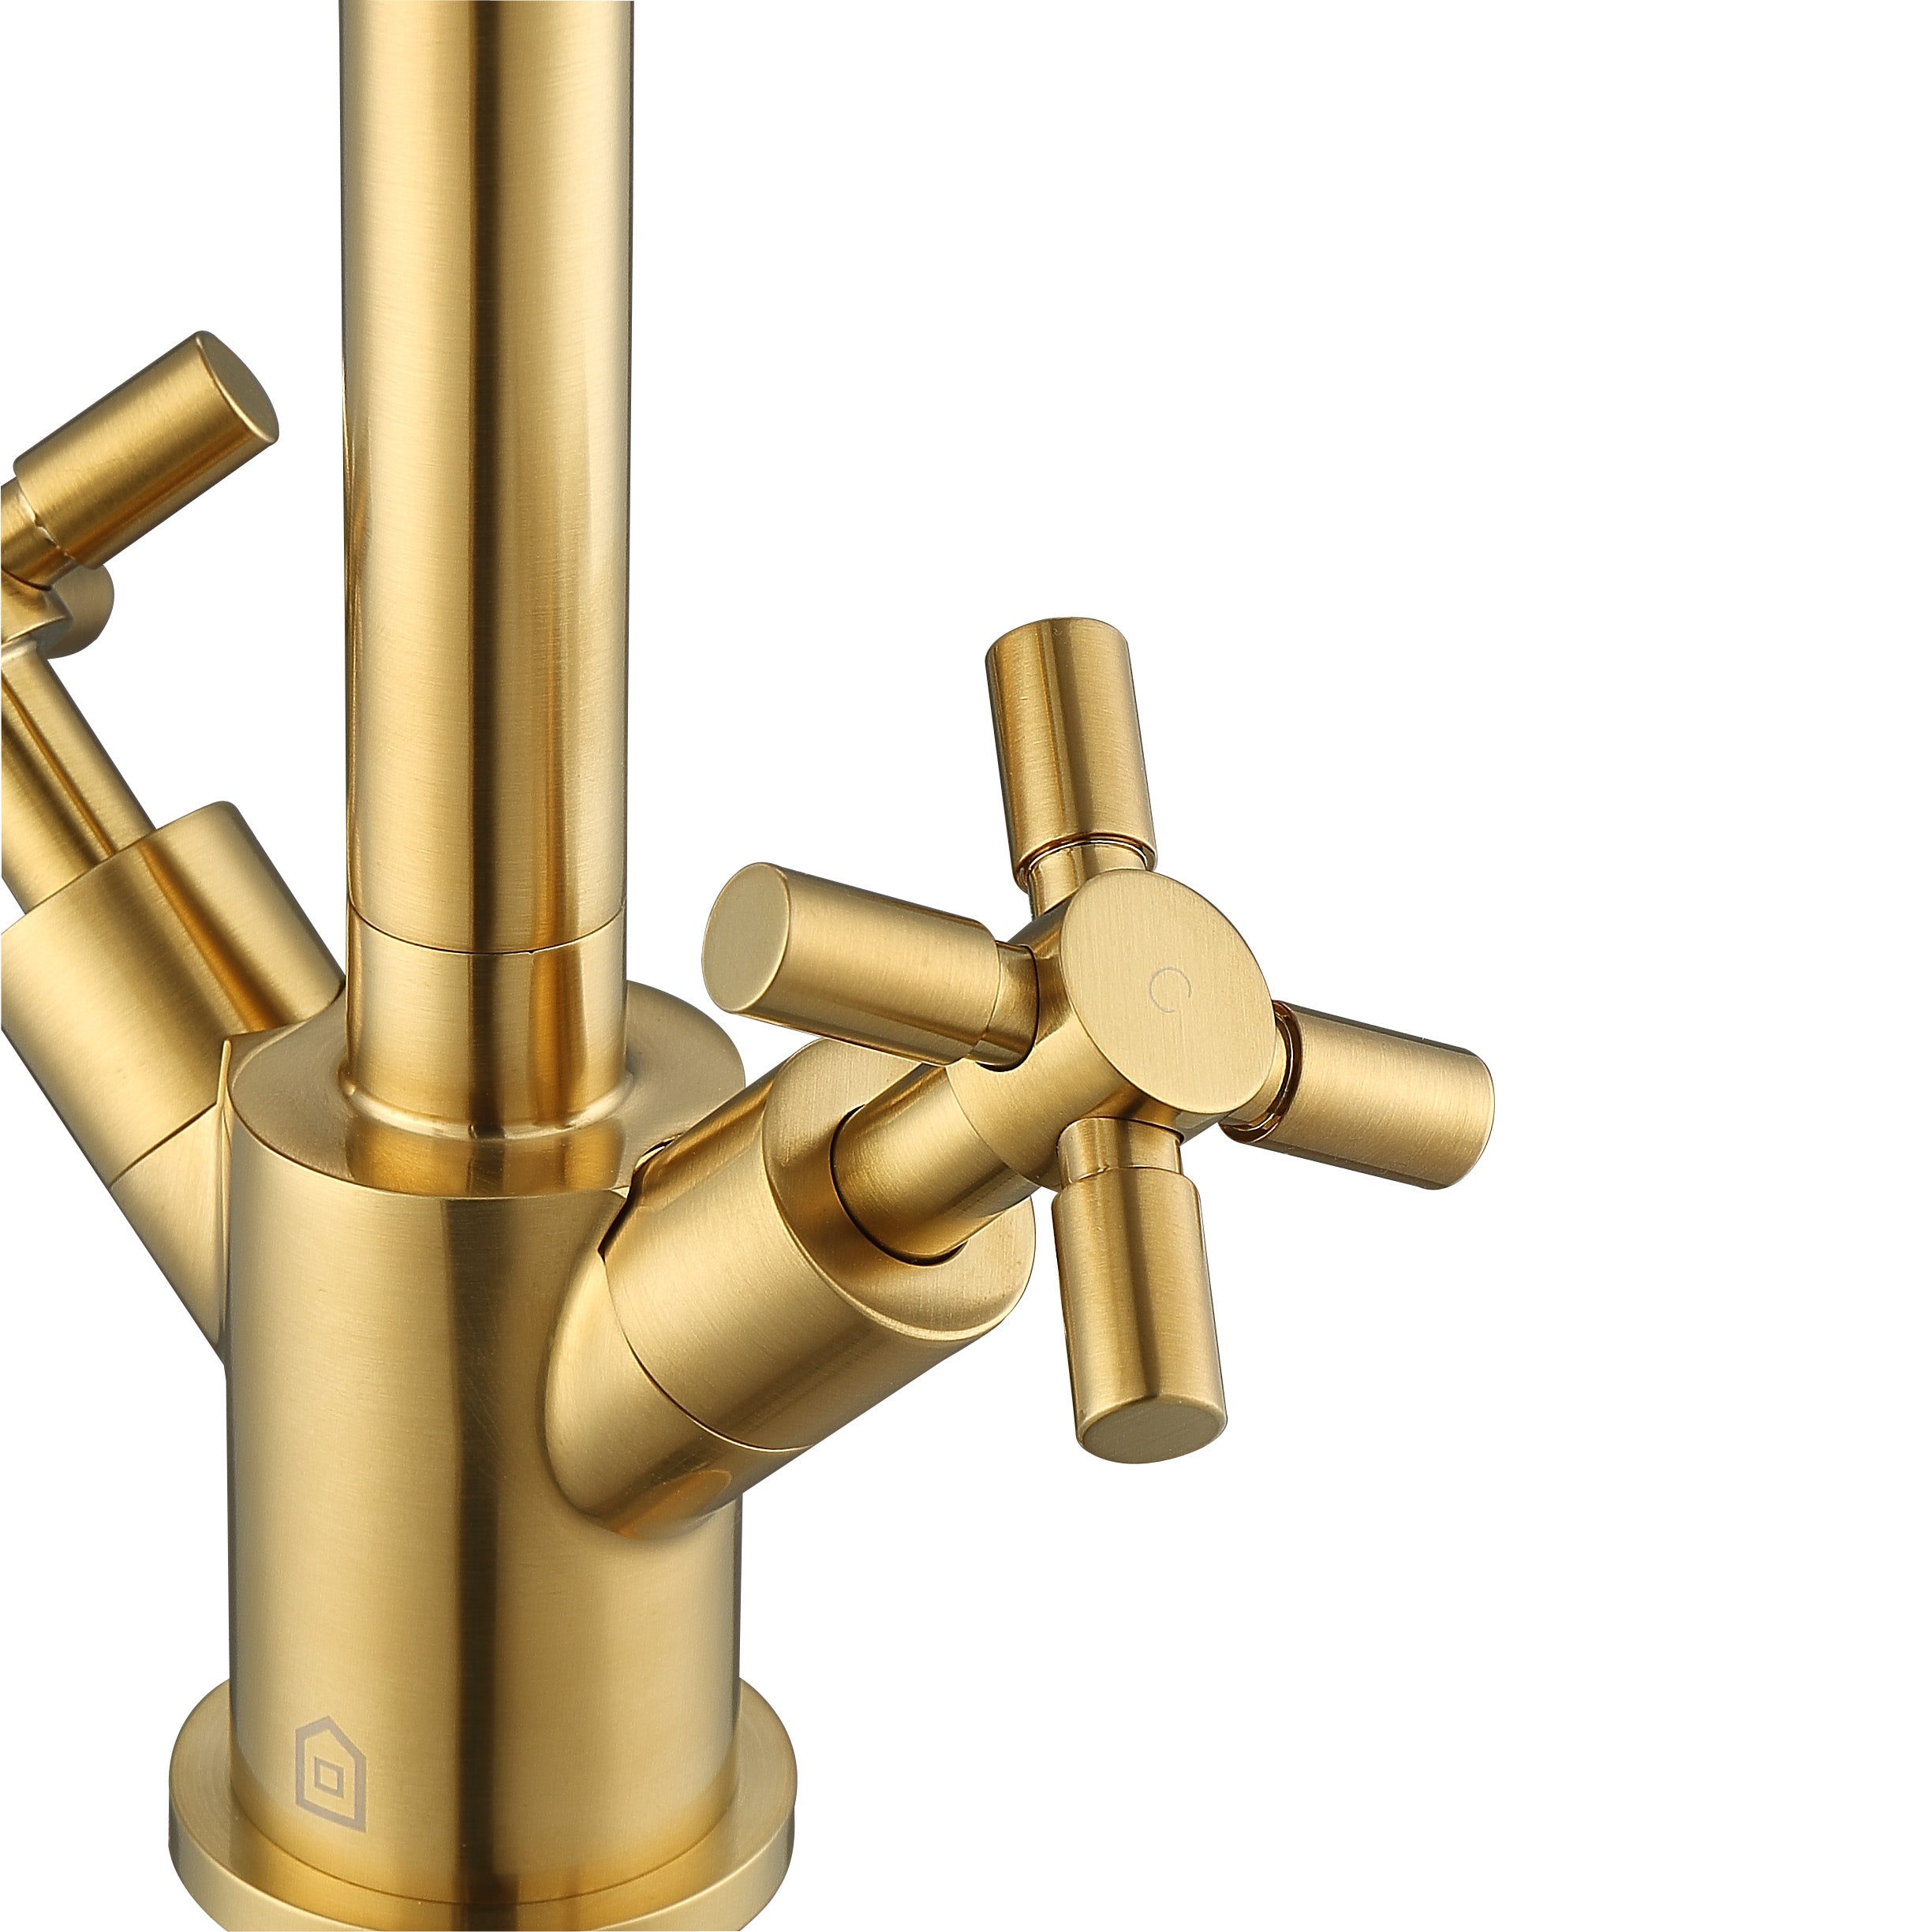 Prima Colori Single Hole Double Cross Handle Bathroom Faucet in Brushed Gold